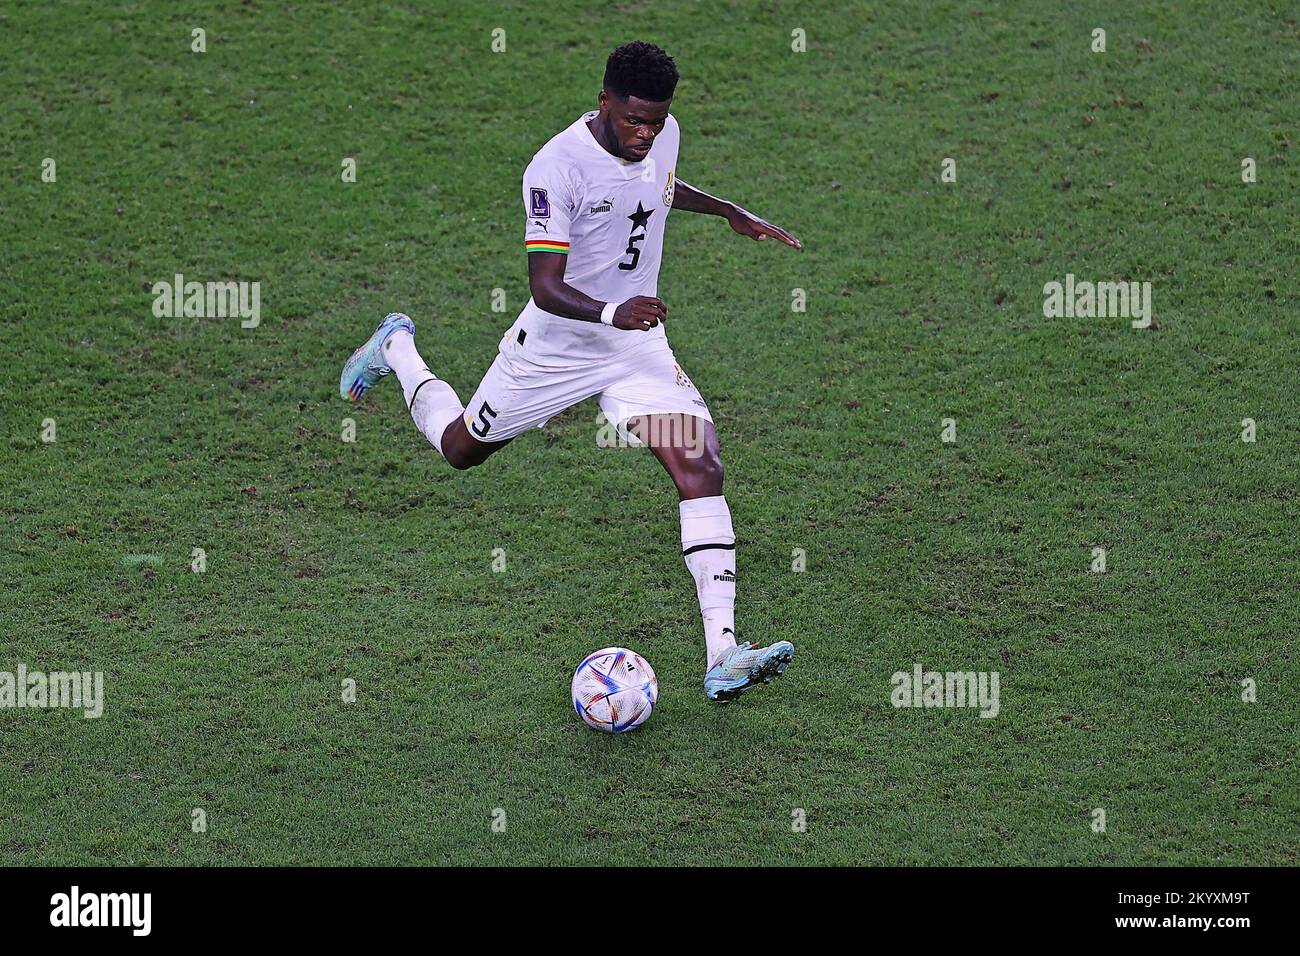 Doha, Qatar. 02nd Dec, 2022. Thomas Partey of Ghana, during the match between Ghana and Uruguay, for the 3rd round of Group H of the FIFA World Cup Qatar 2022, Al Janoub Stadium this Friday 02. 30761 (Heuler Andrey/SPP) Credit: SPP Sport Press Photo. /Alamy Live News Stock Photo